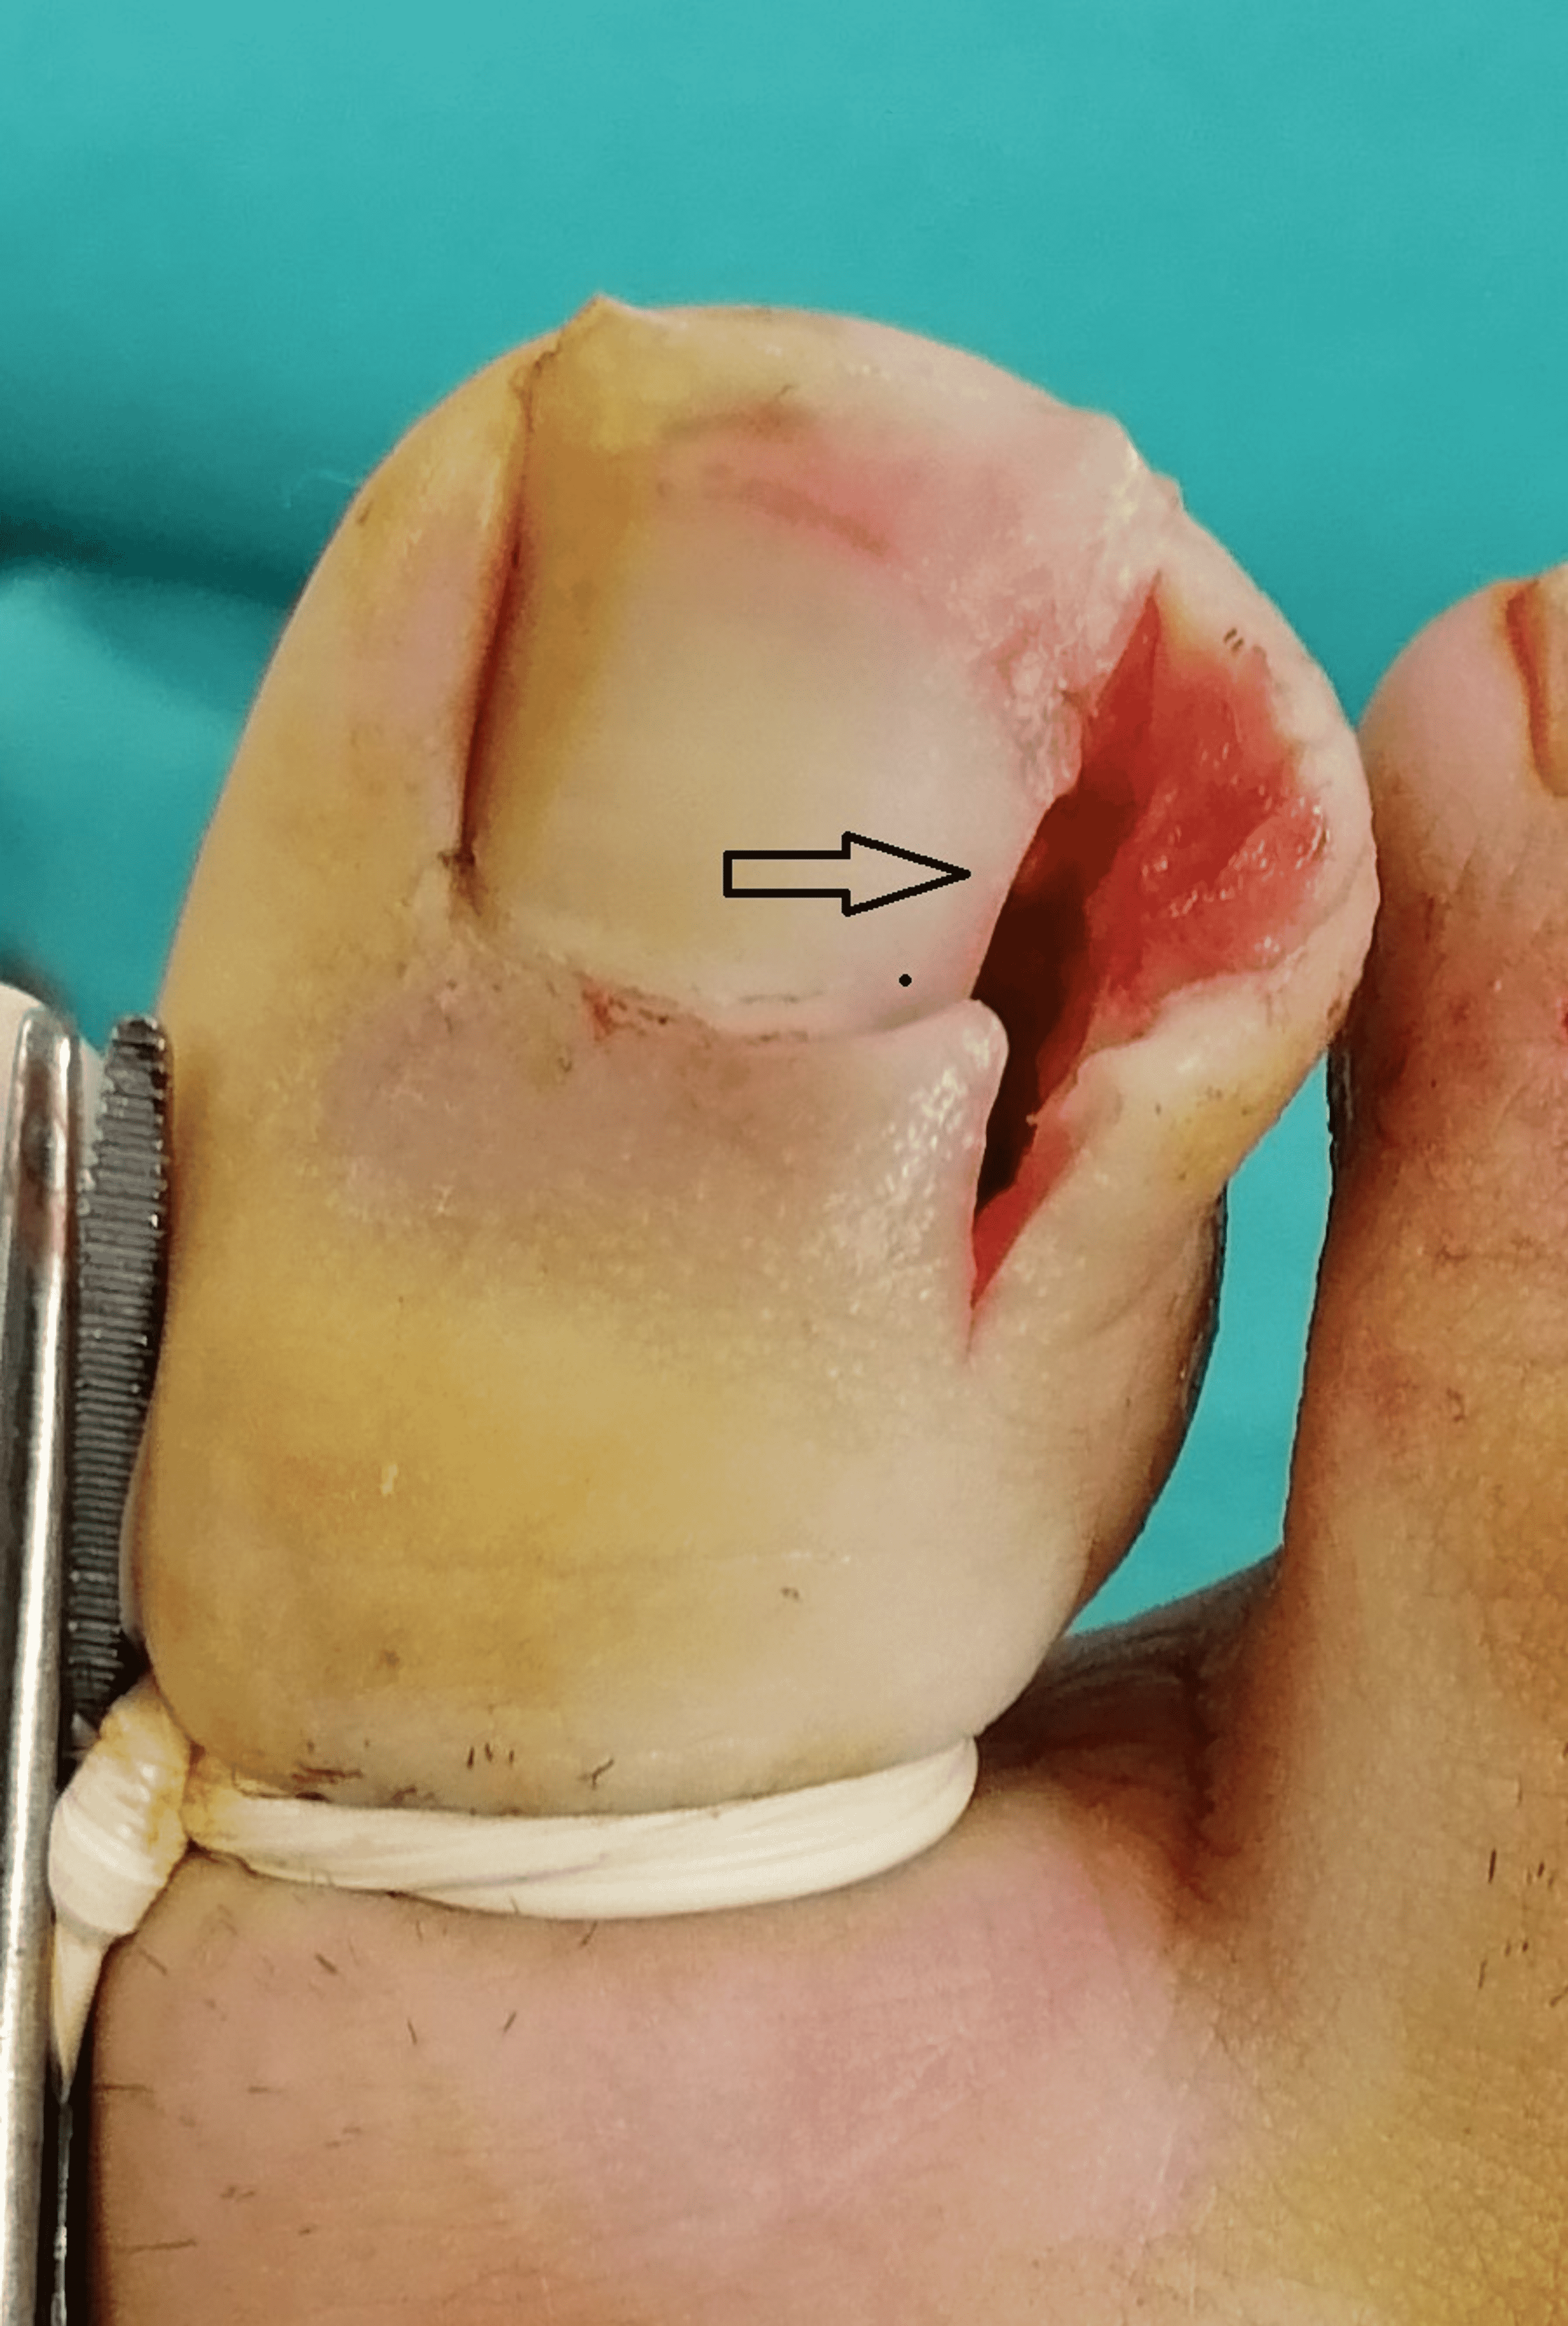 Cureus | A Comparison of Clinical Outcomes Between the Winograd and  Modified Winograd Methods for Ingrown Toenails: A Retrospective Study of  the Importance of Suturing Techniques | Article